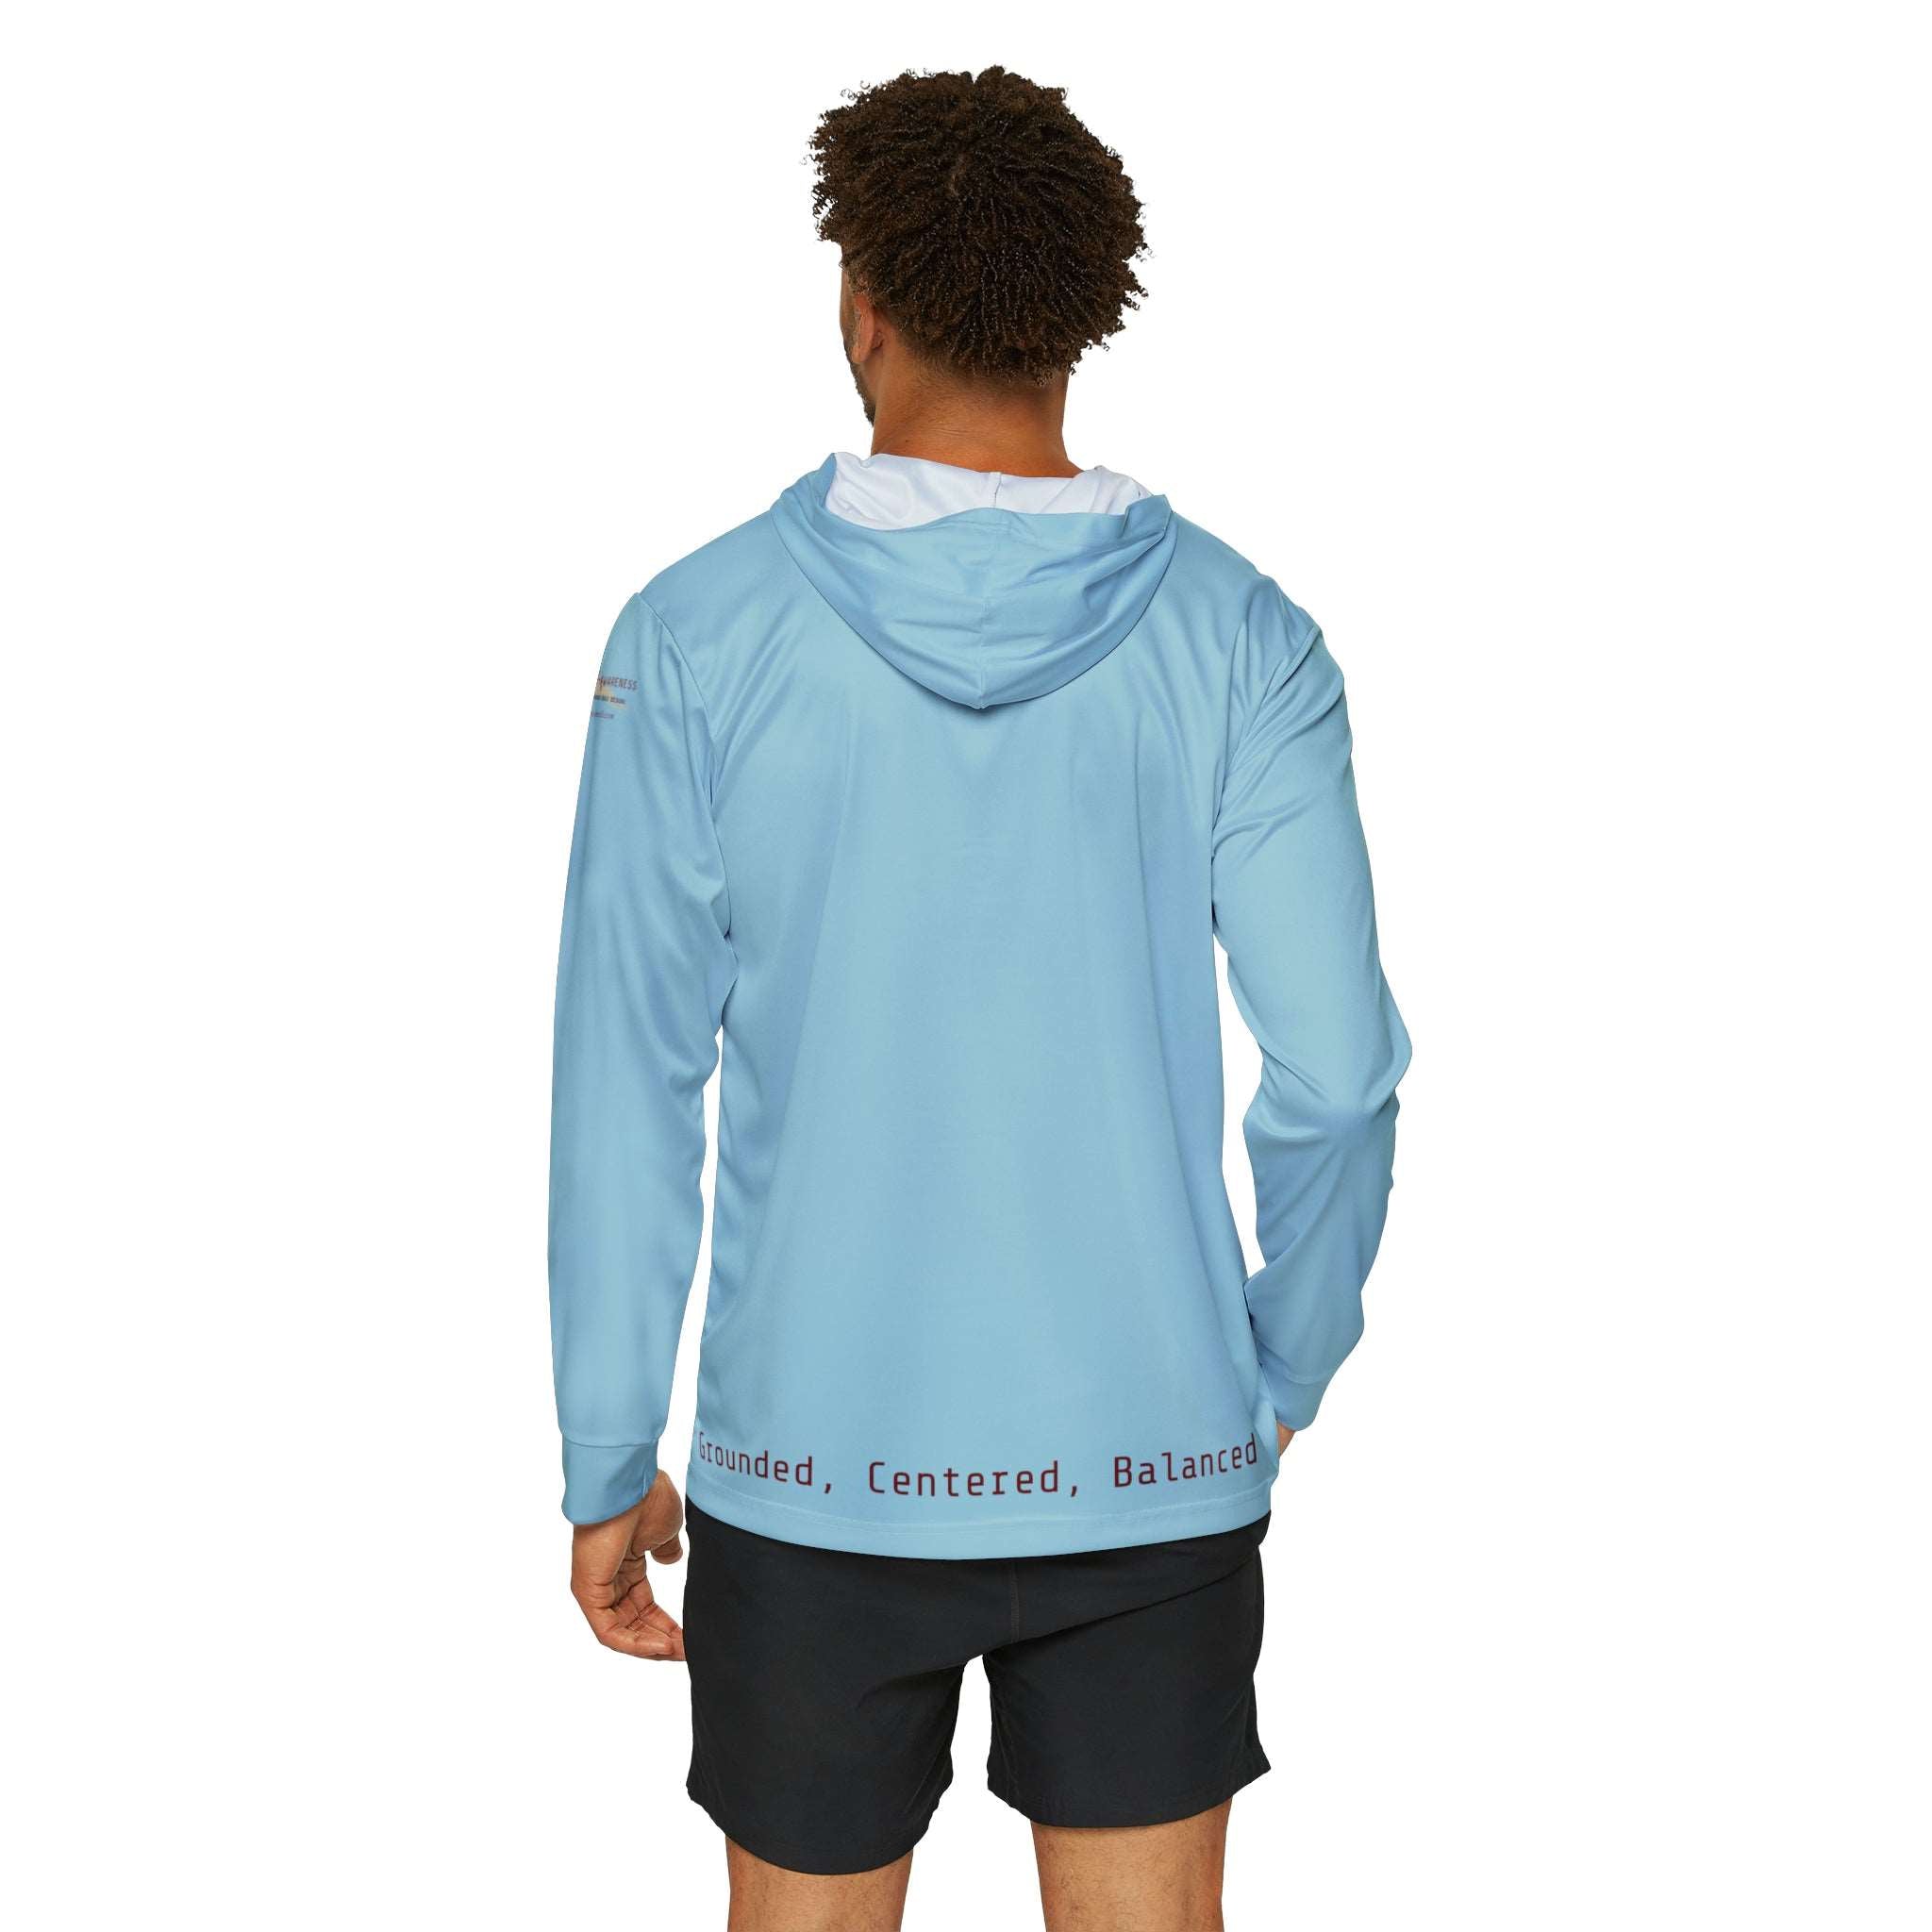 Confident Men's Warmup Hoodie: Conquer Challenges Activewear Durable Fabric Made in USA Men's Hoodie Mental Health Support Moisture-wicking Performance Apparel Quality Control Sports Warmup UPF 50+ All Over Prints 1269211612855340050_2048_9475ab32-2947-4e67-be0b-69dbfdad3de8 Printify